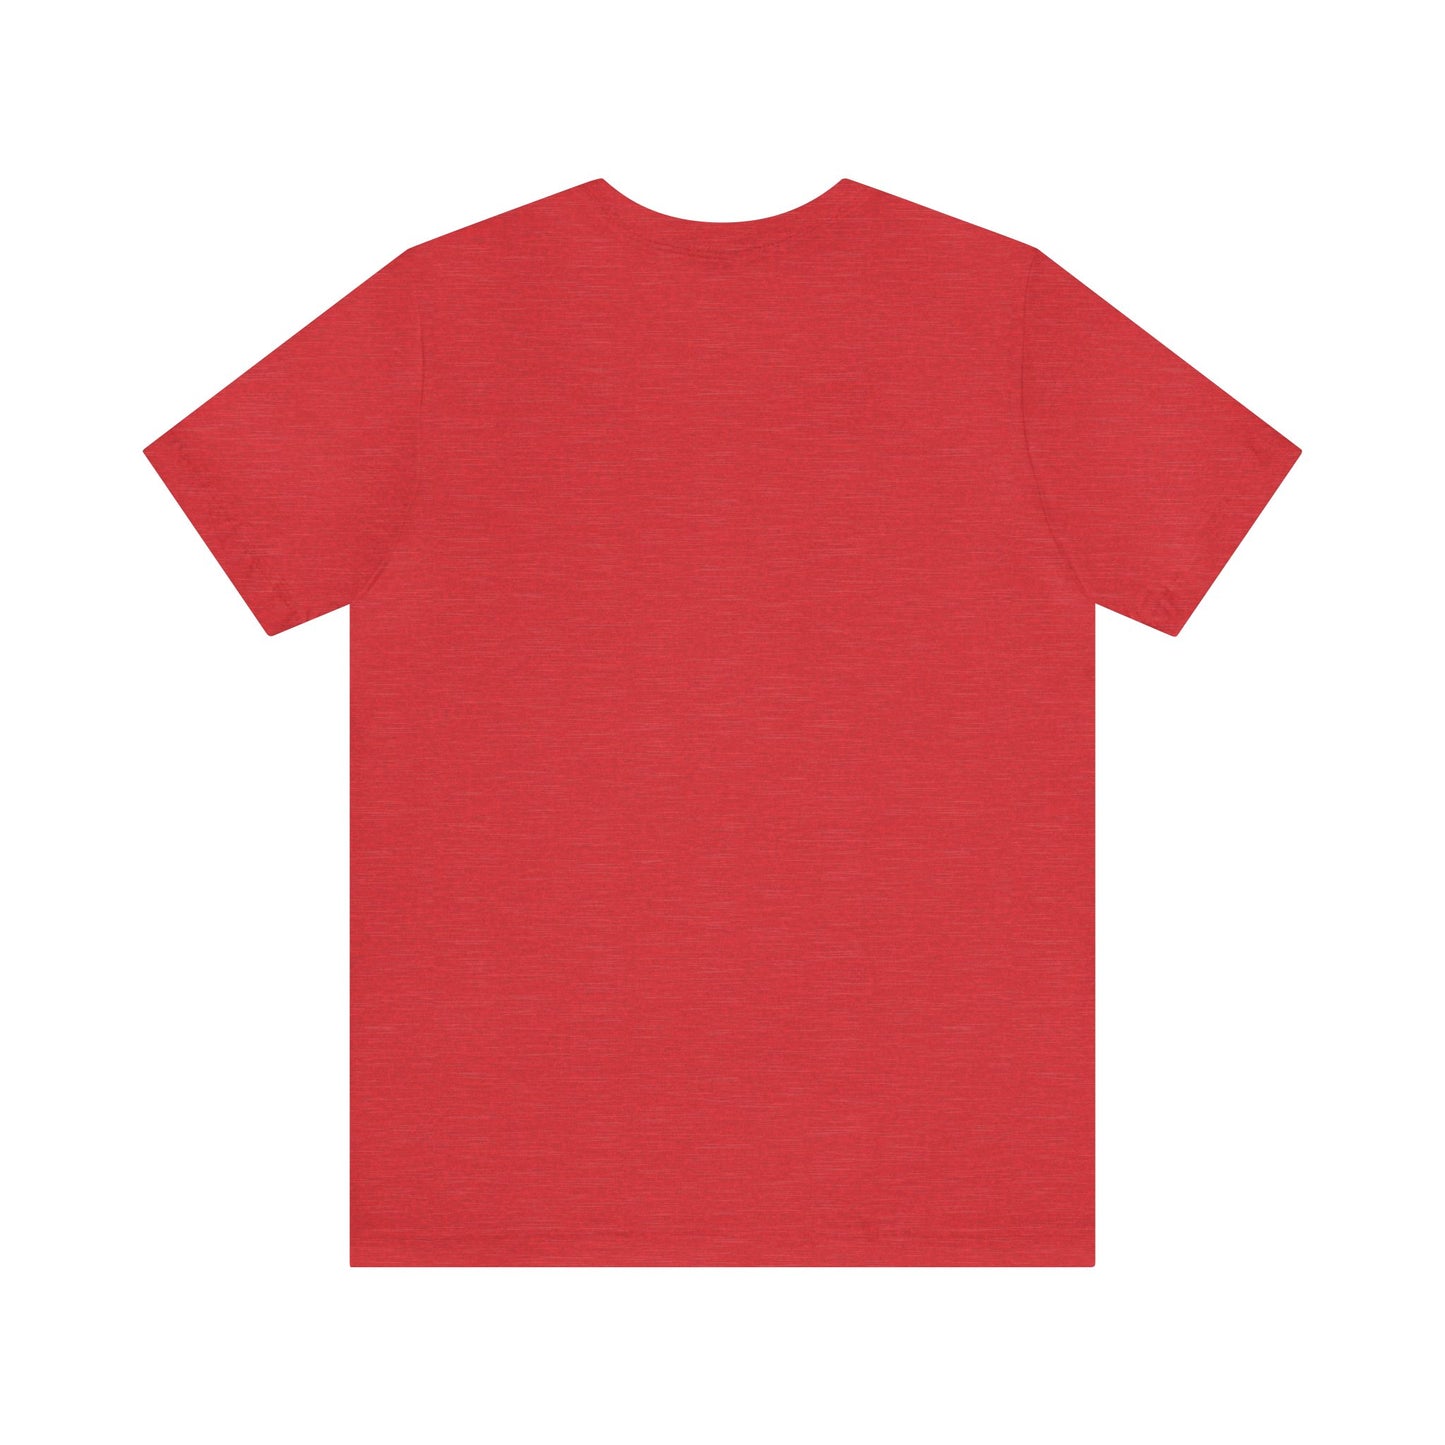 "Camp Explorer Short-Sleeve T-shirt with Ribbed Knit Collars" (Unisex)